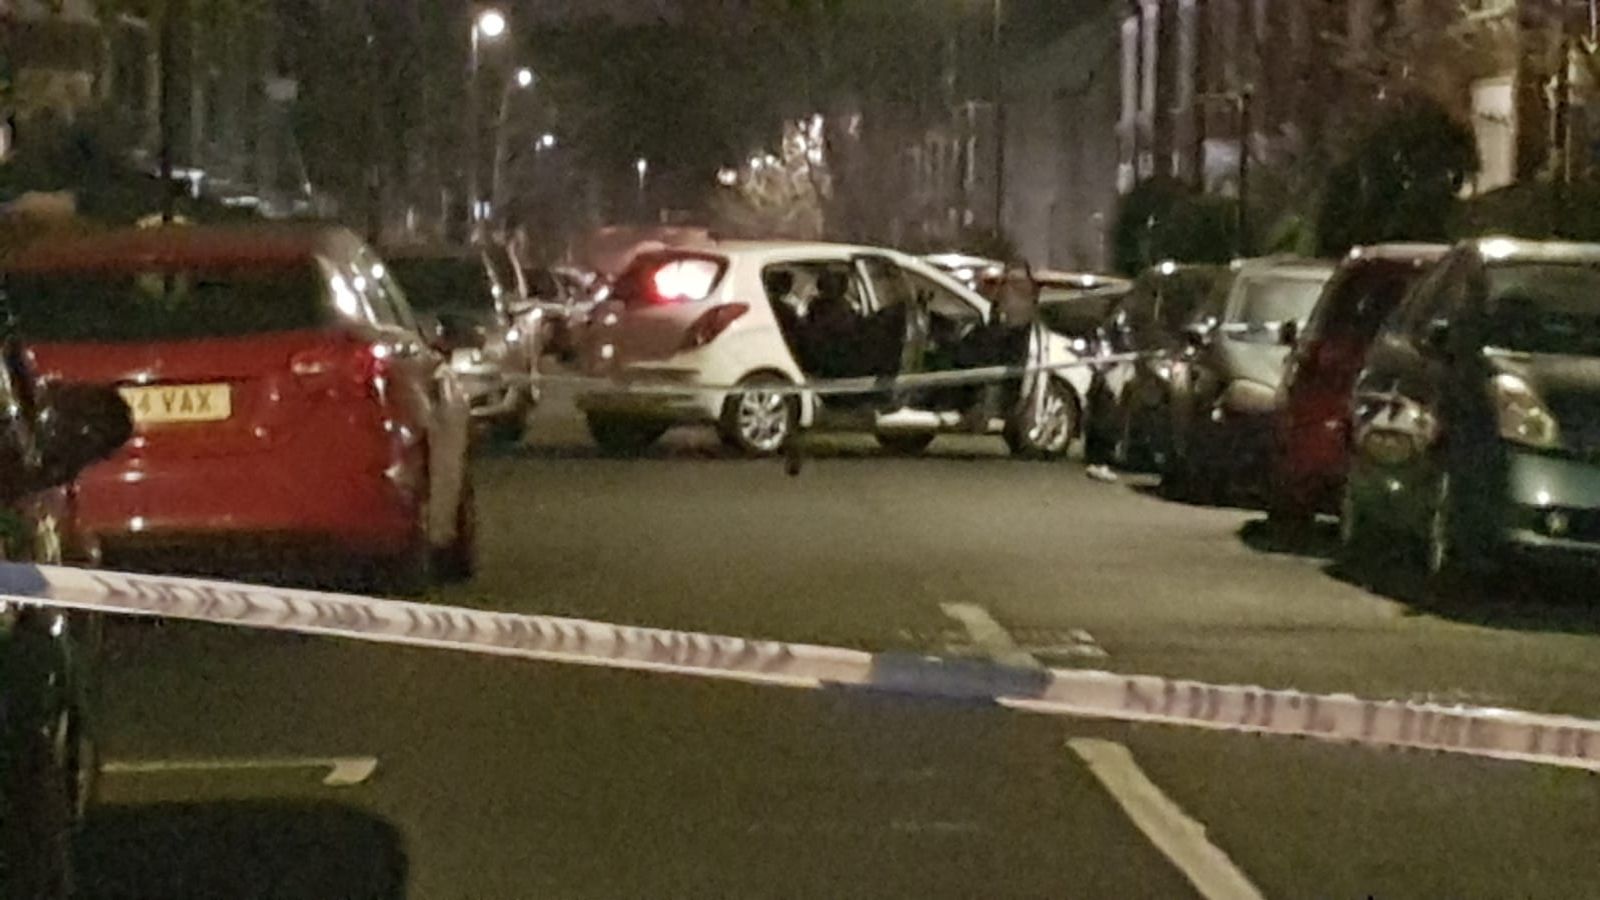 Nine injured after 'corrosive substance' thrown in Clapham, south London